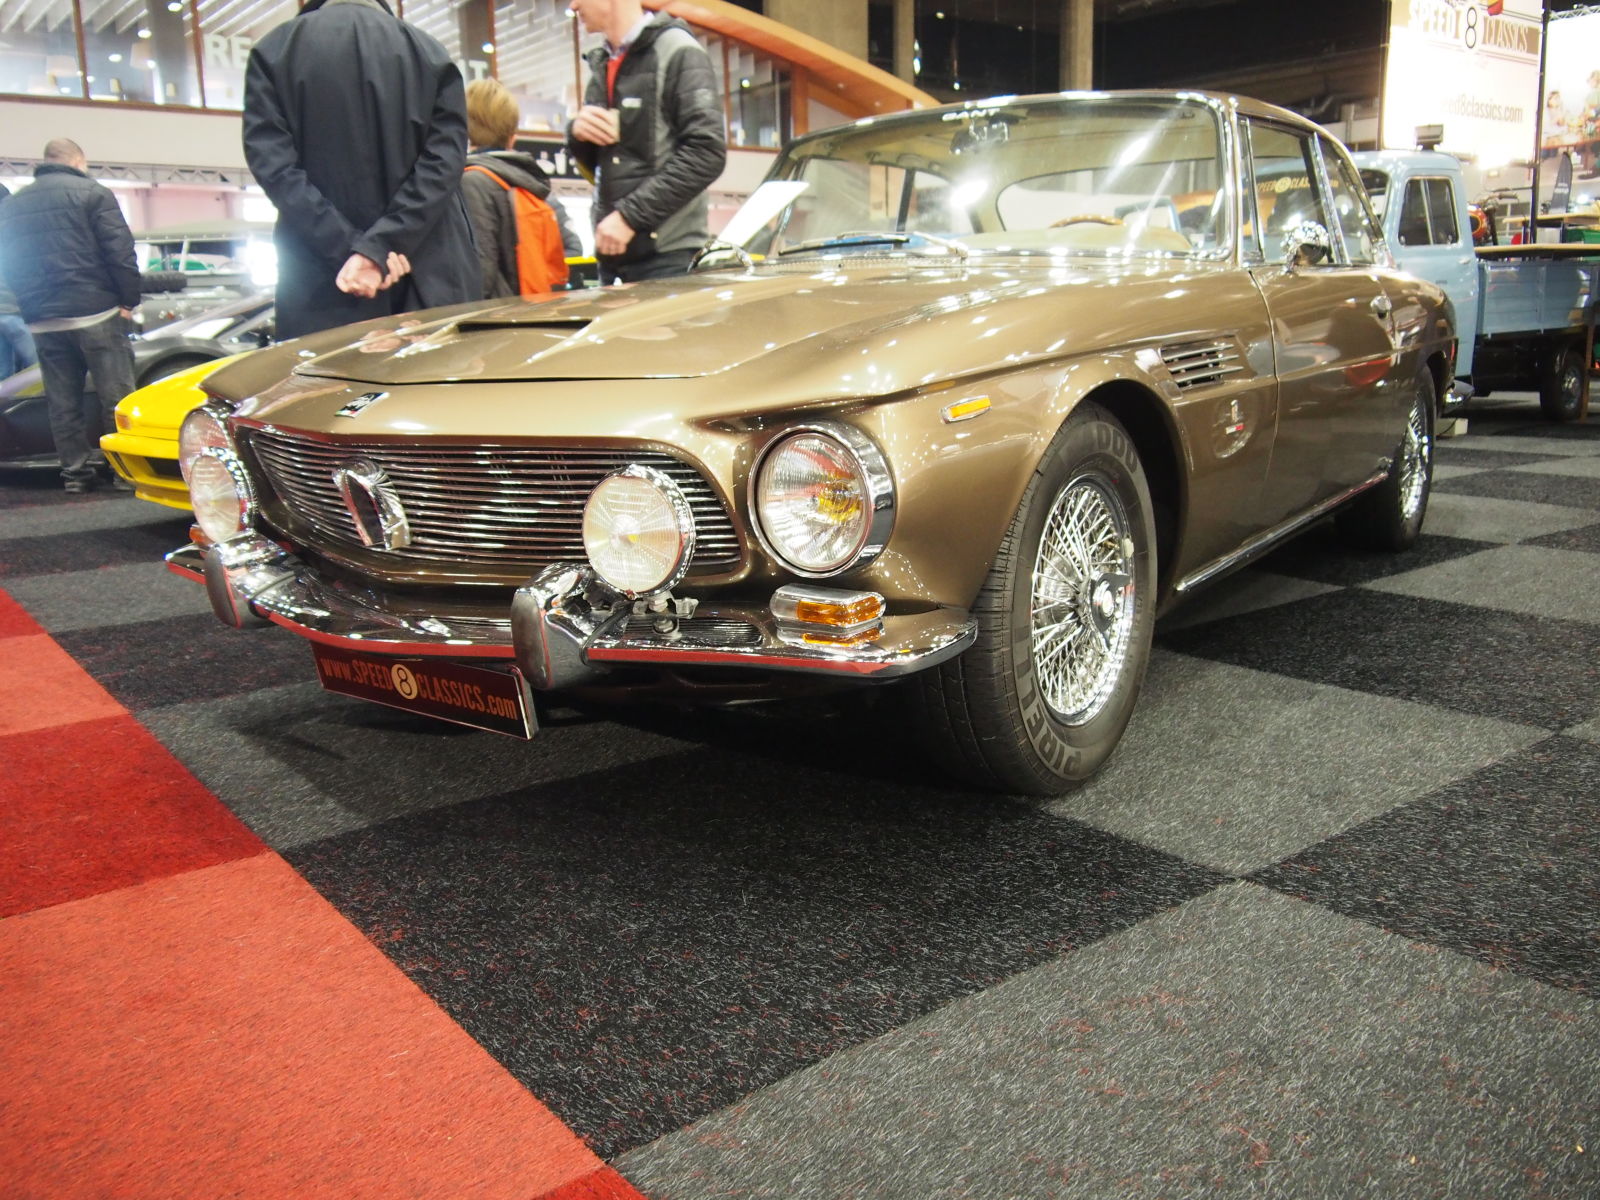 This ‘64 Iso Rivolta GT also has an insectoid face.